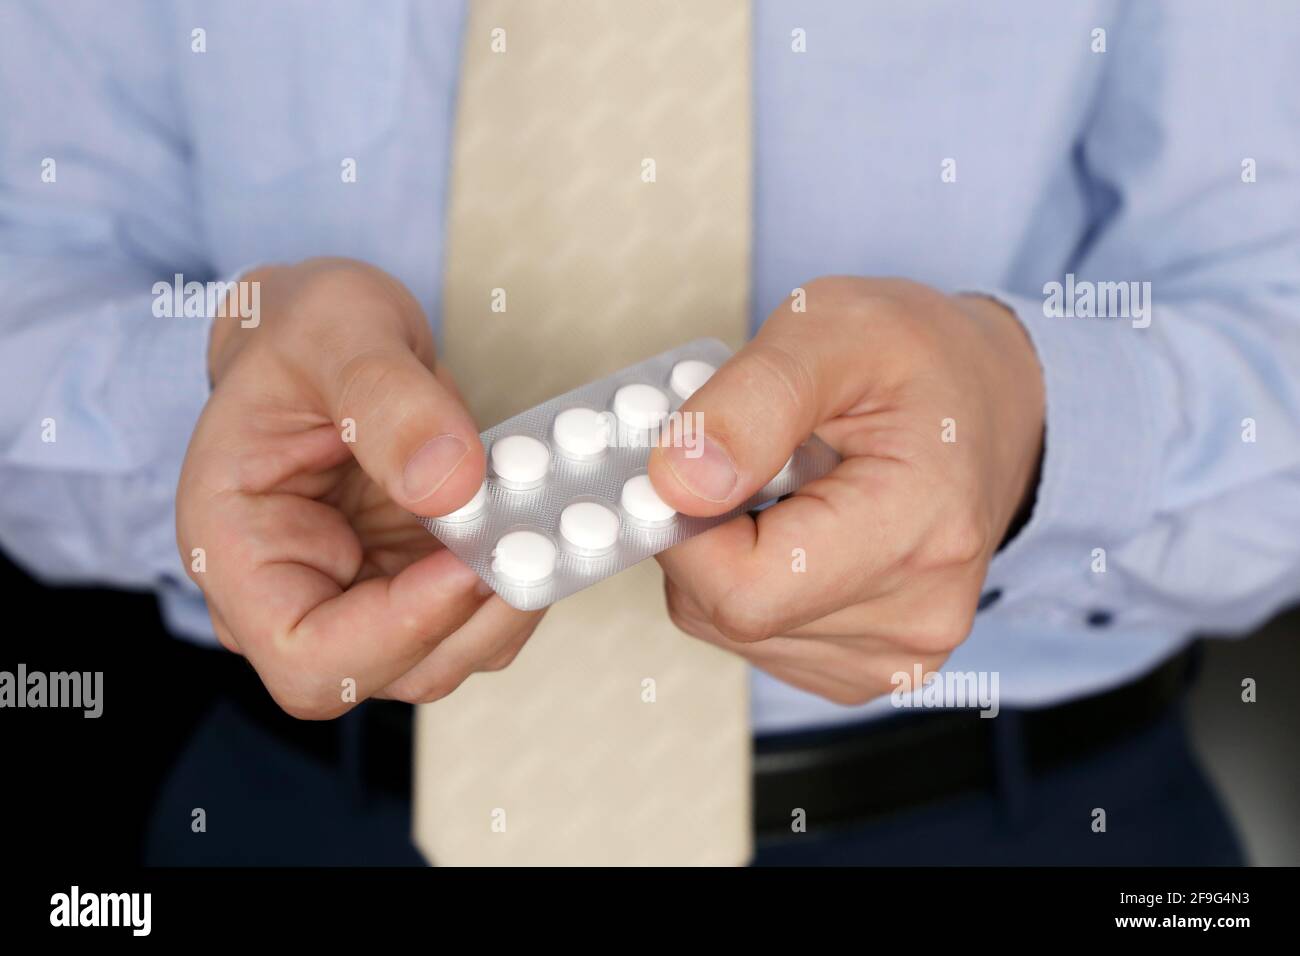 Man in office clothes taking pills, pack of medication in male hands close up. Concept of antidepressant, stress at work, vitamins, dose of drugs Stock Photo